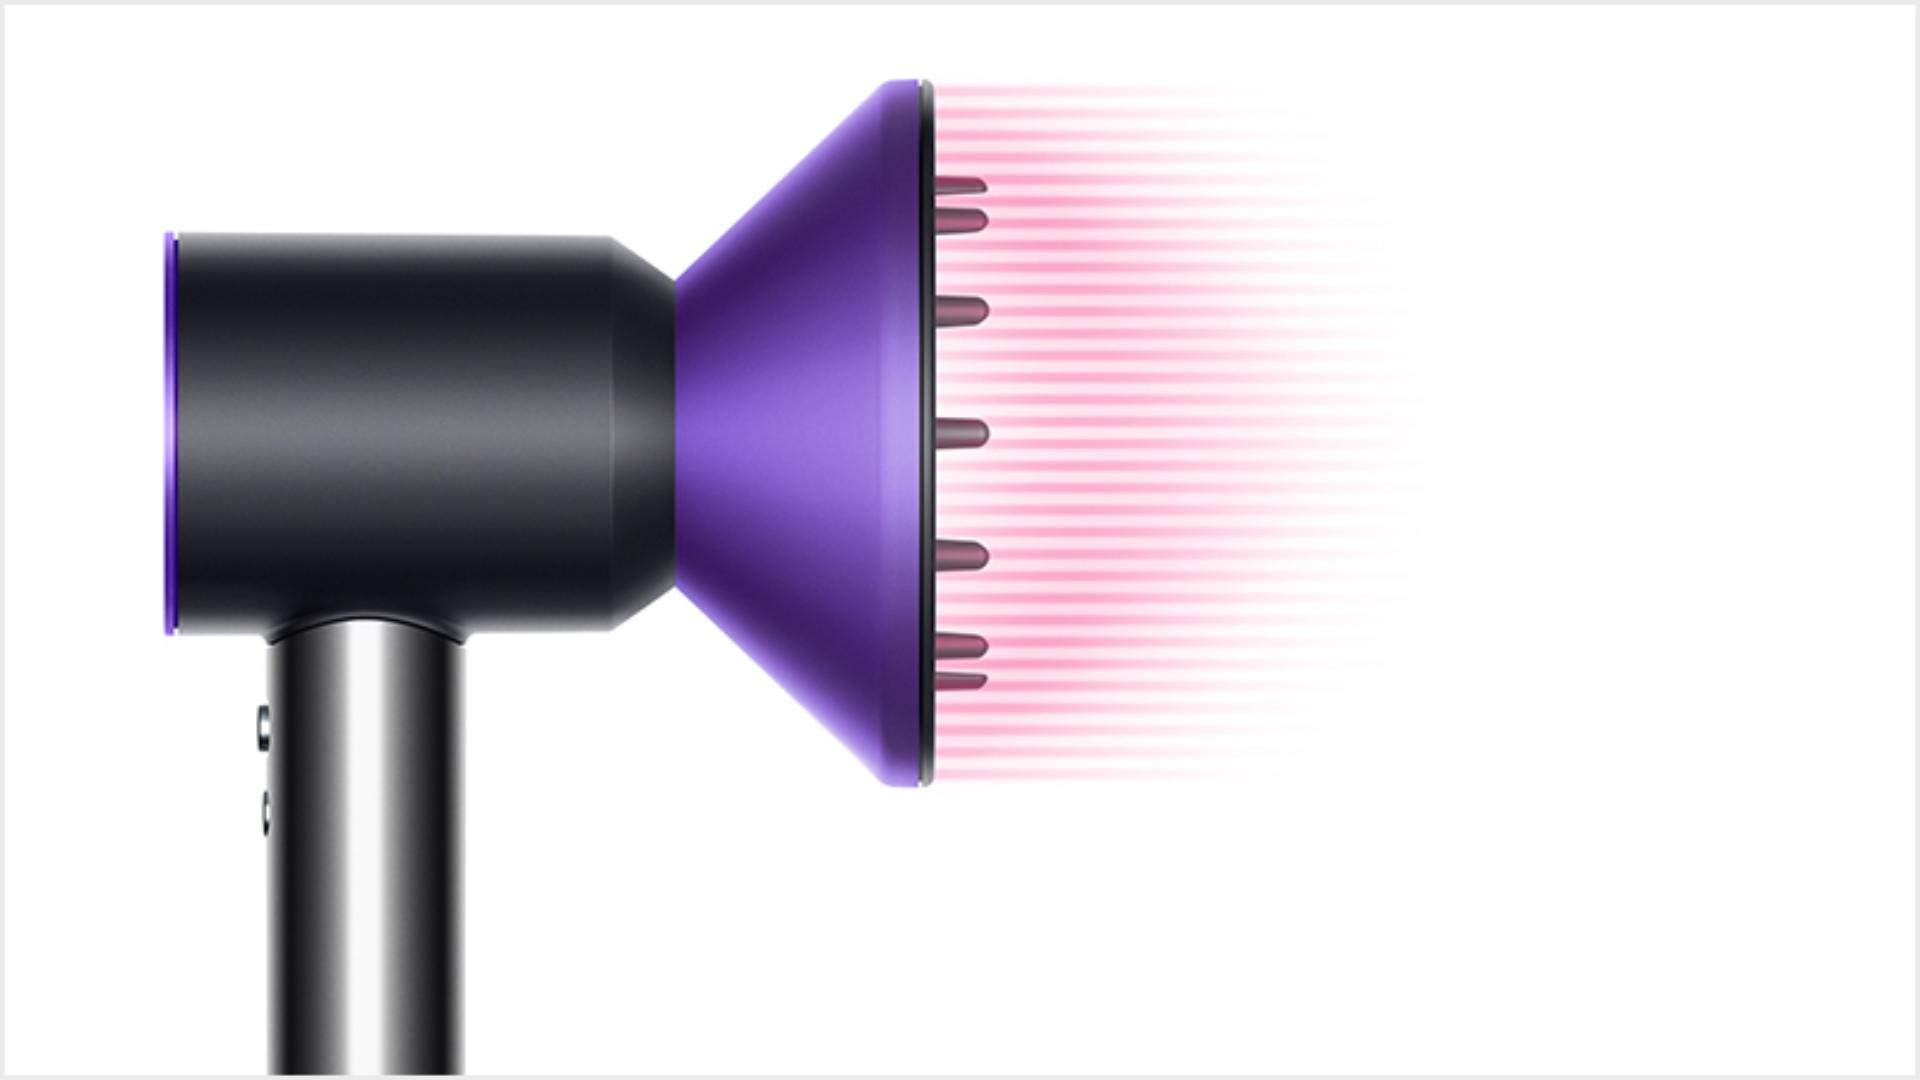 Dyson Supersonic™ hair dryer Black/Nickel with re-engineered Diffuser attached